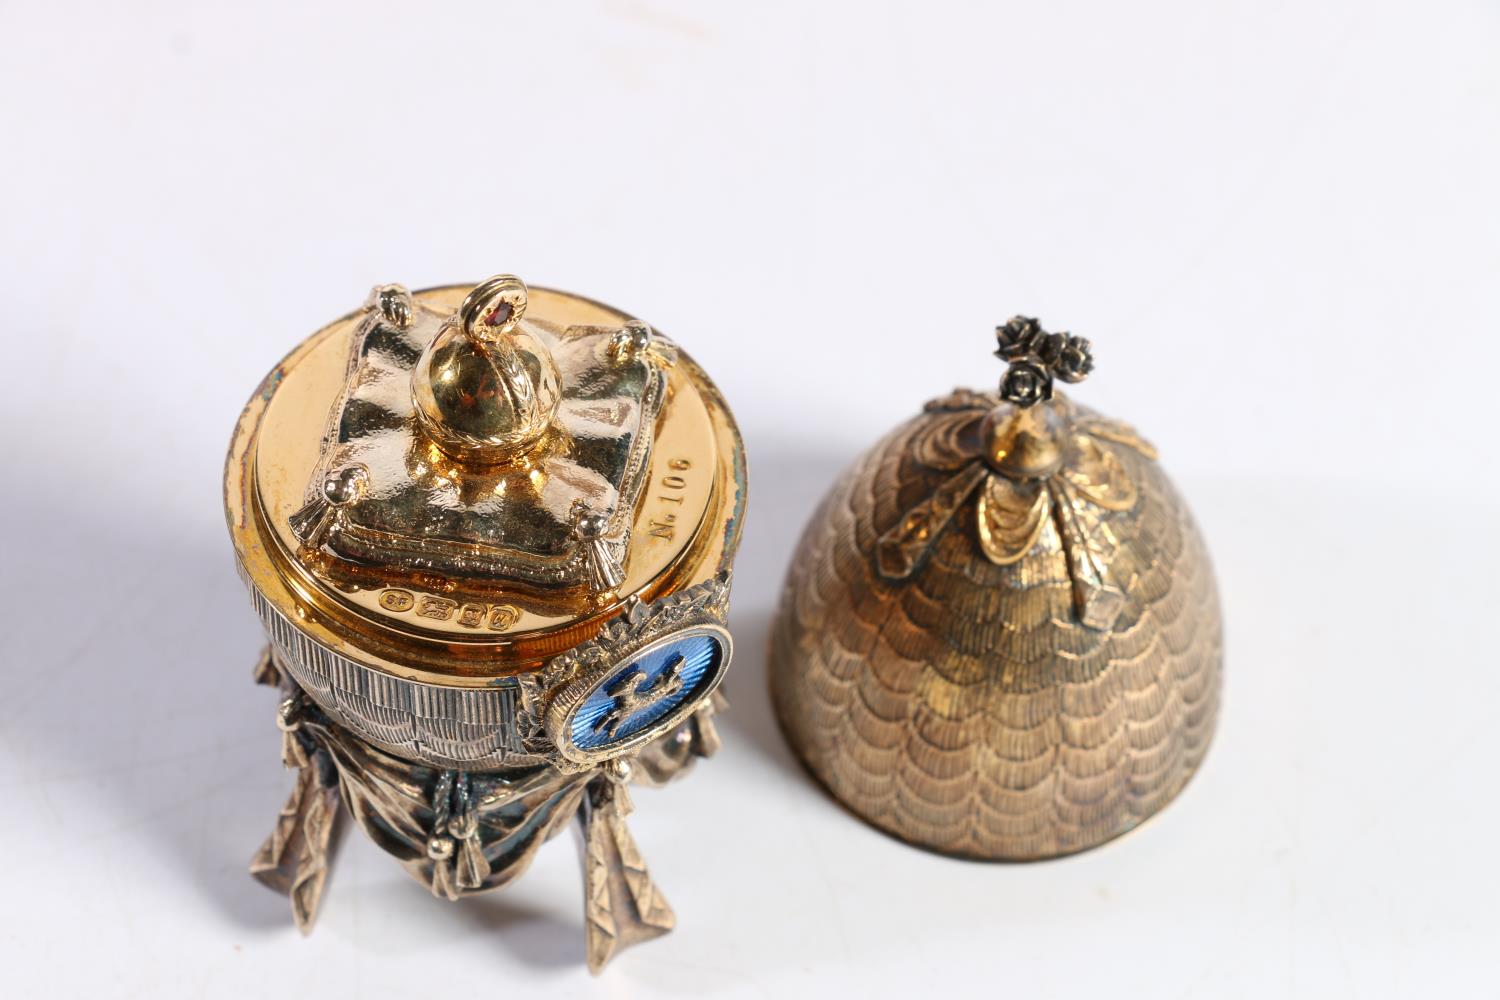 Limited Edition, Sarah Faberge, silver gilt 'Capricorn' Zodiac Egg, No. 106/500, in presentation - Image 3 of 3